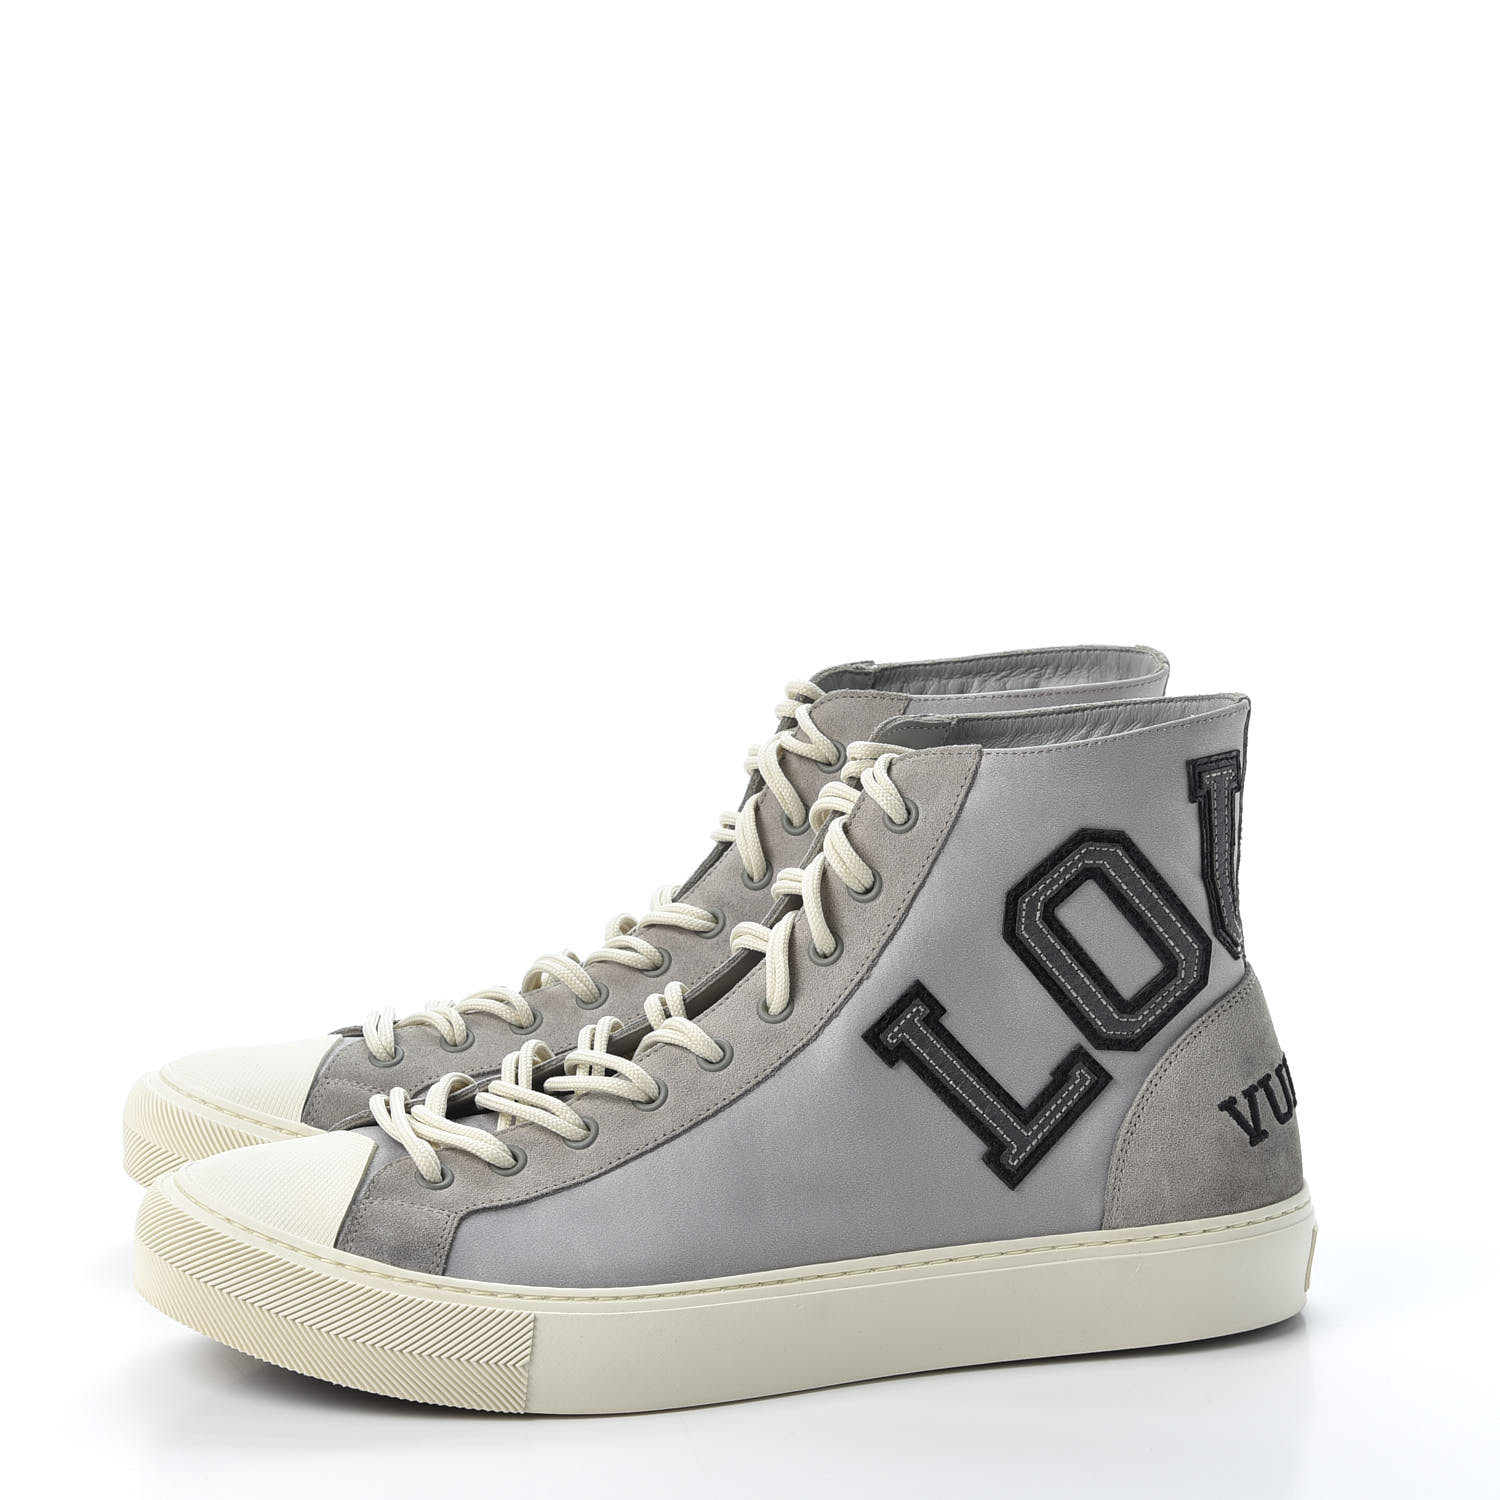 LOUIS VUITTON Suede Sneakers 9 Gray 576125 | FASHIONPHILE